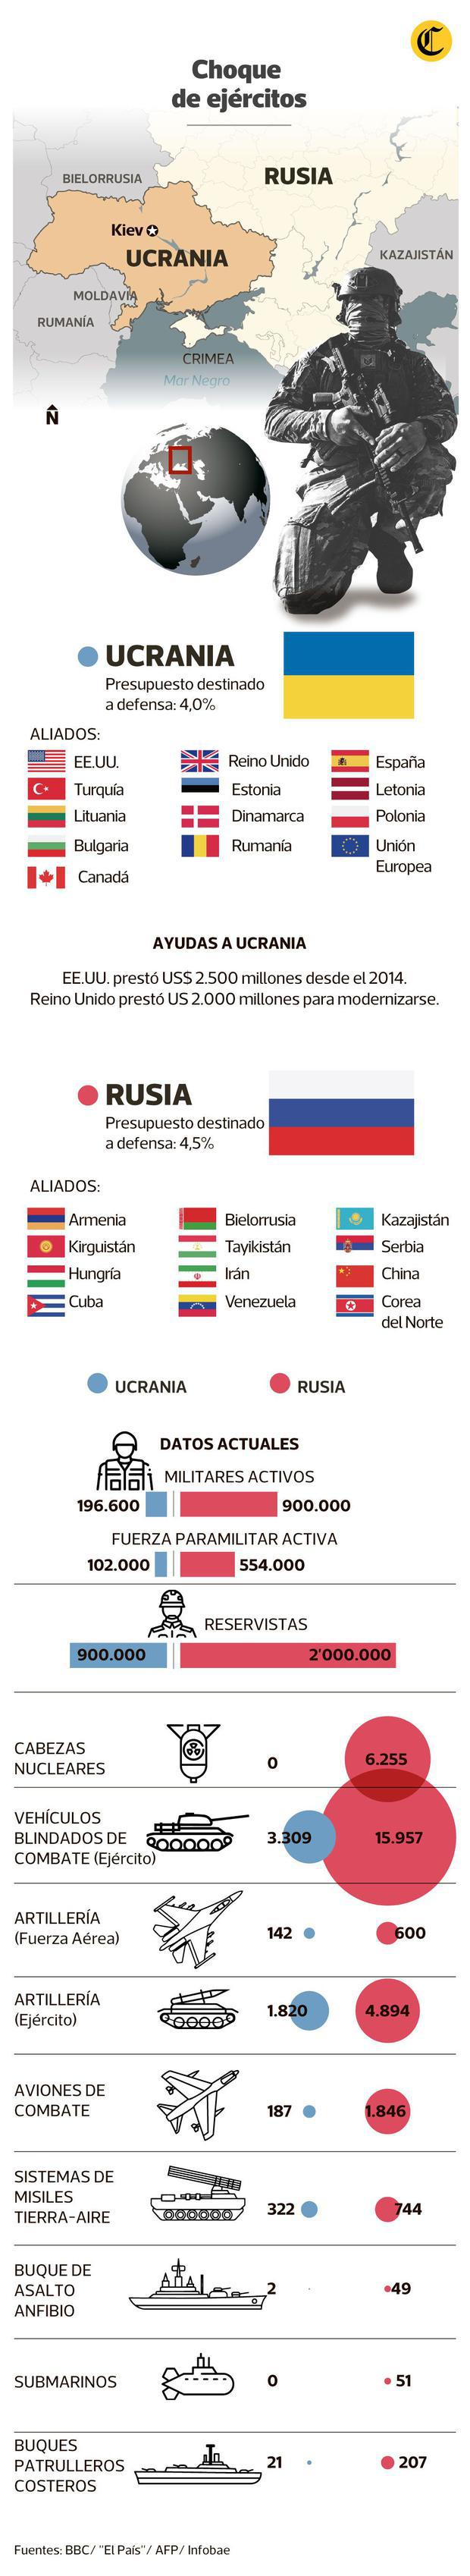 Military power of Russia and Ukraine.  (Commerce).